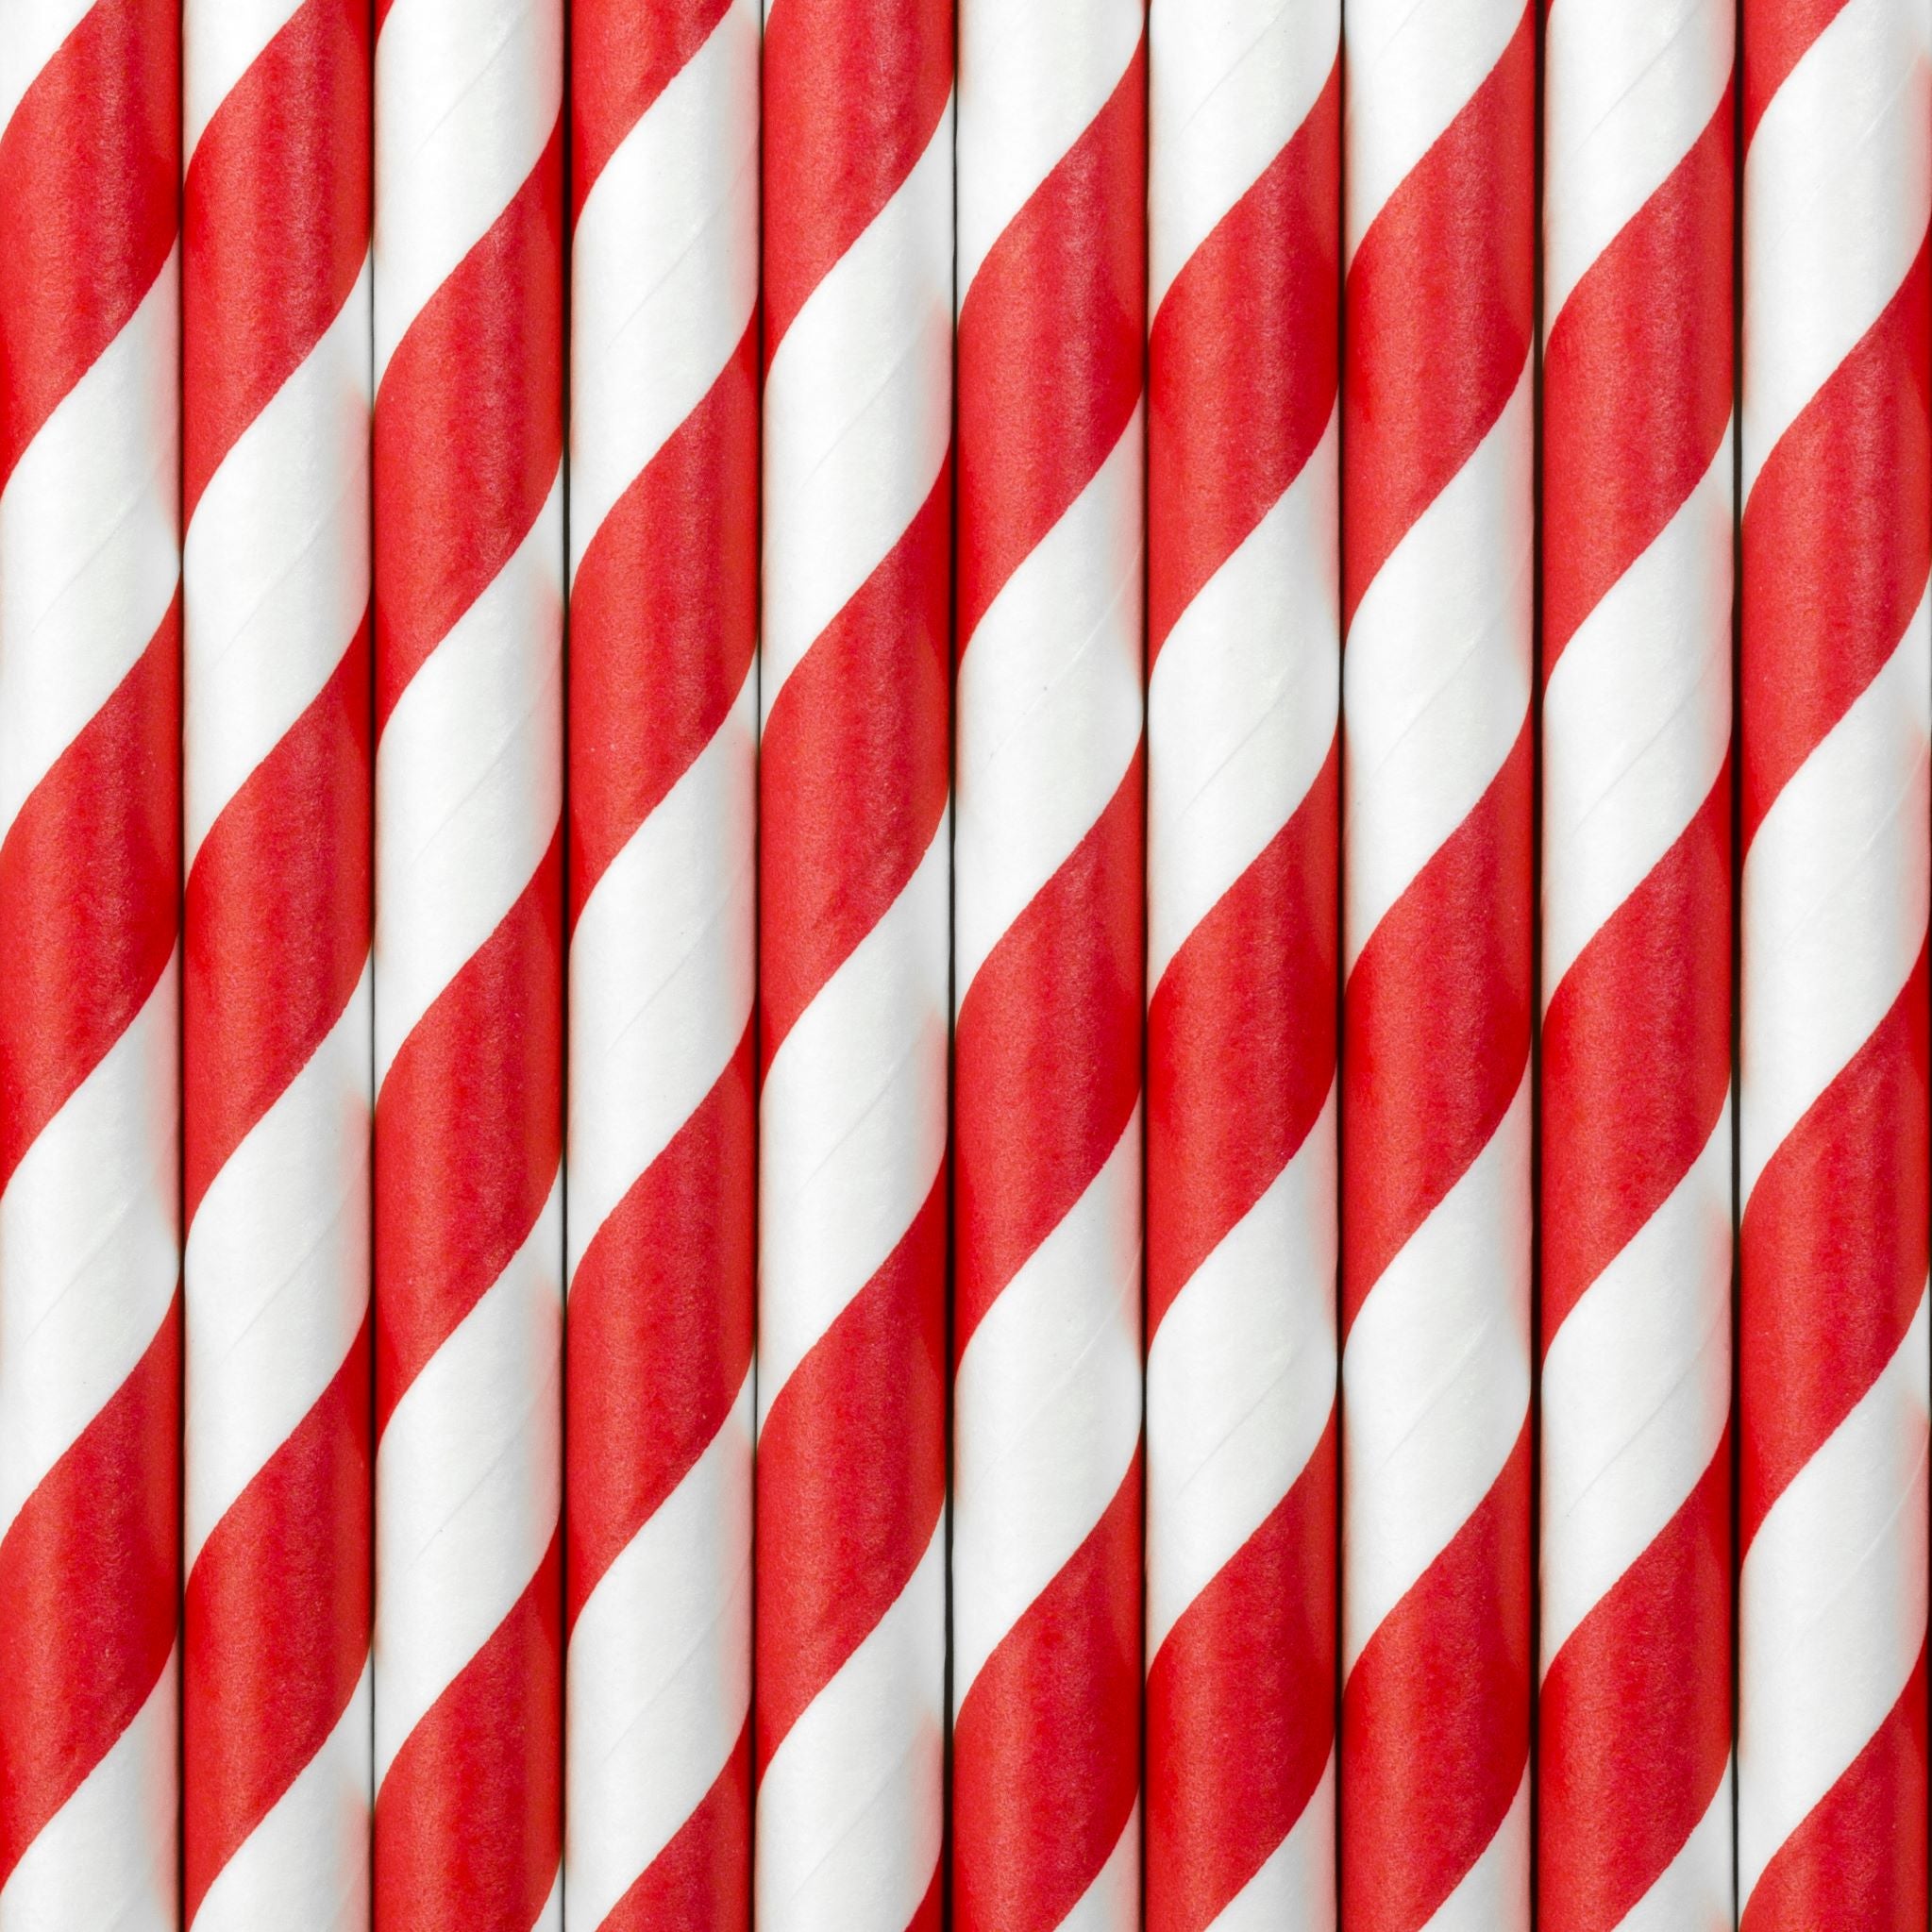 Red Candy Cane Paper Straws Pack of 10